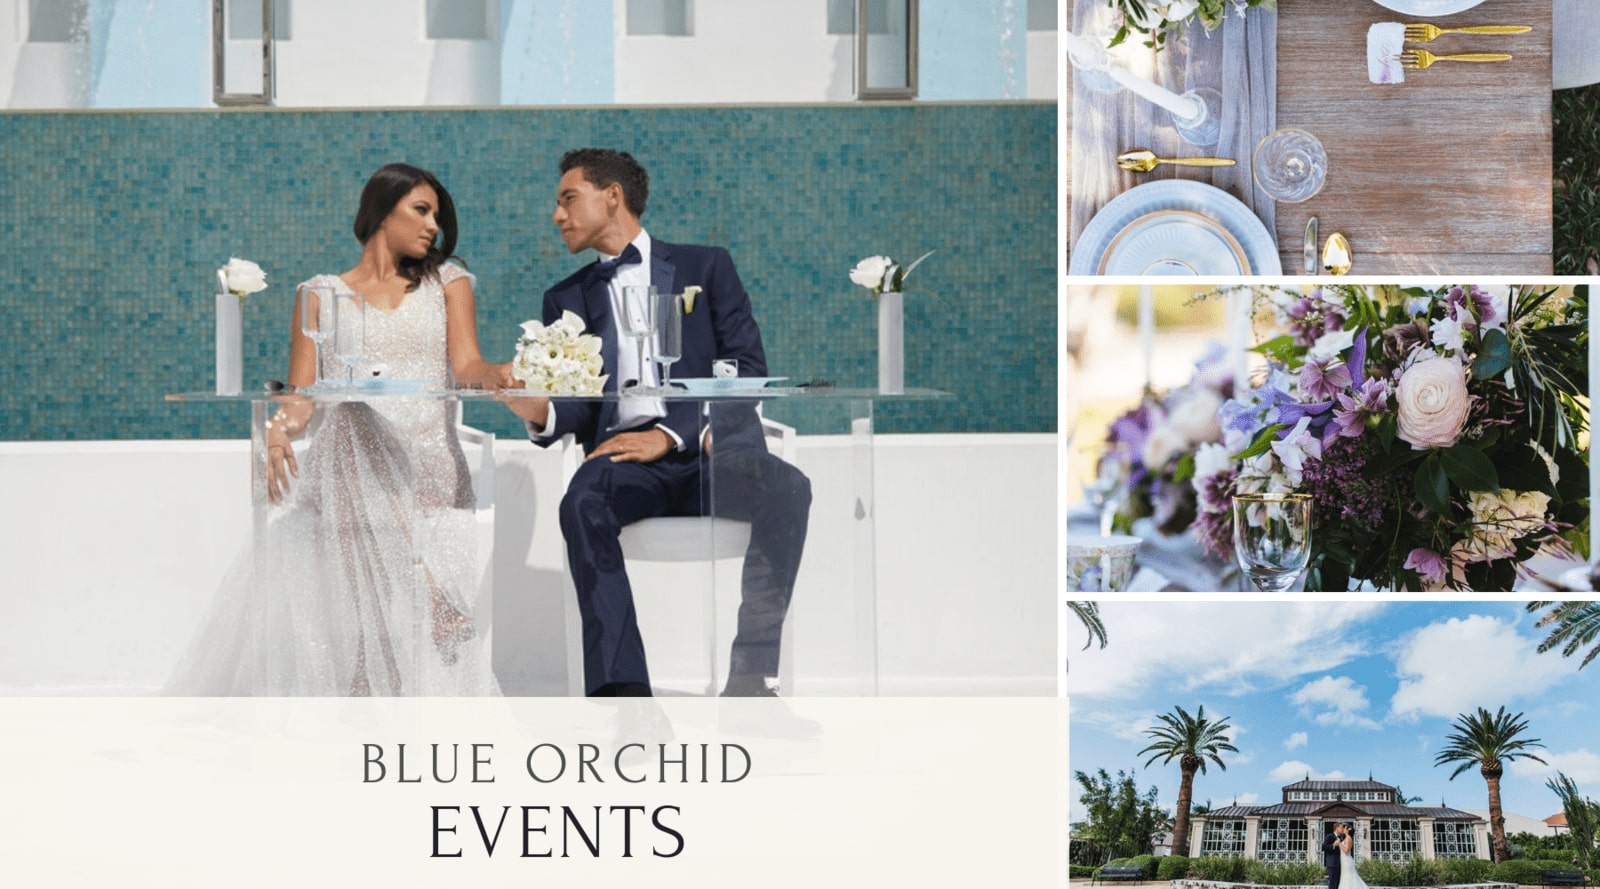 ABBY GALLAGHER FROM BLUE ORCHID EVENTS & DESIGN